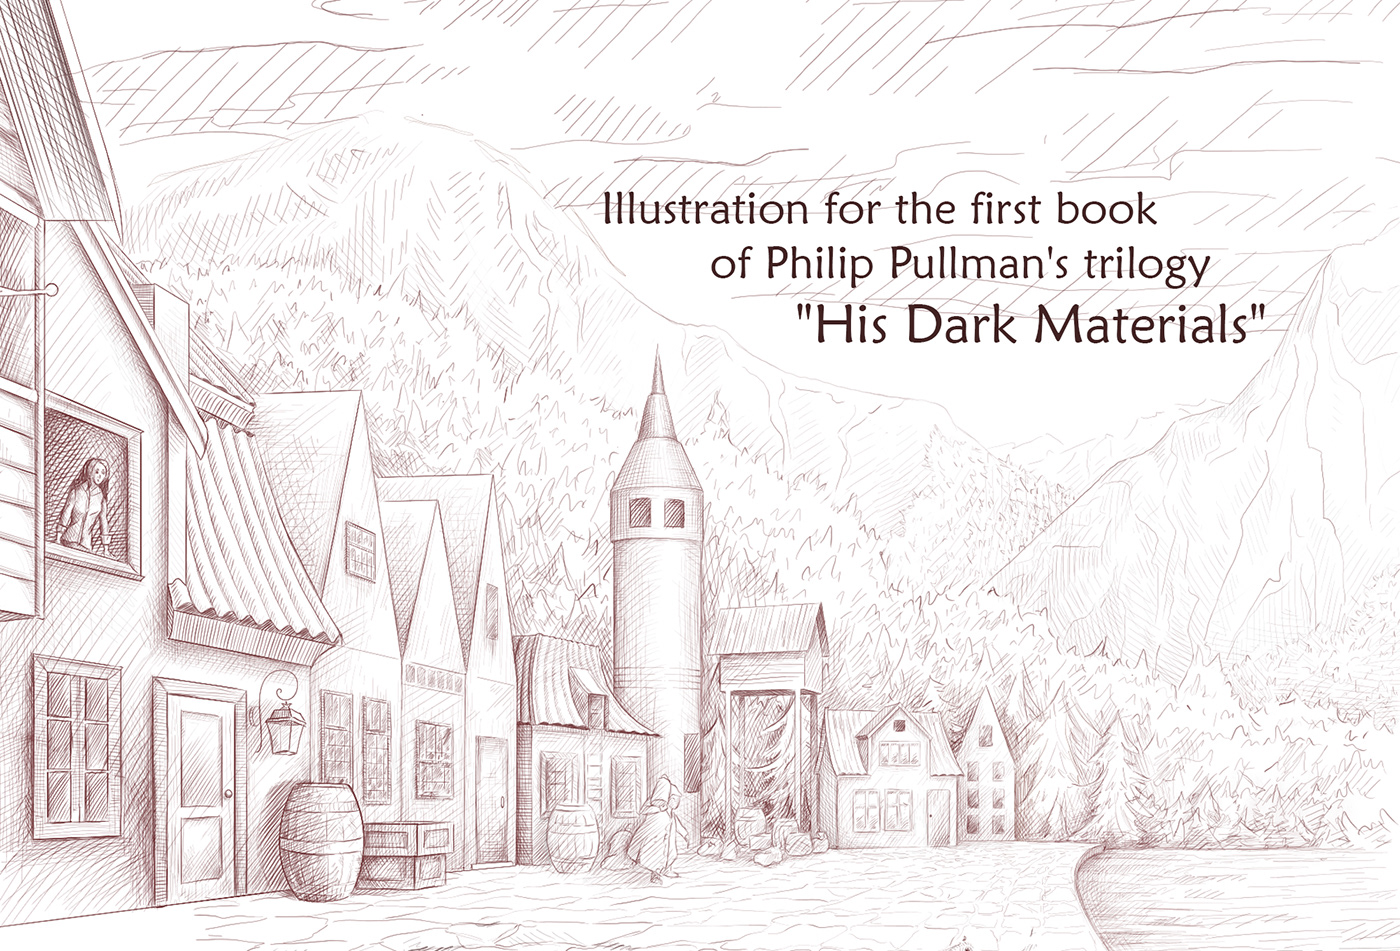 Illustration for the first book of Philip Pullman's trilogy "His Dark Materials" - "Northern lights"